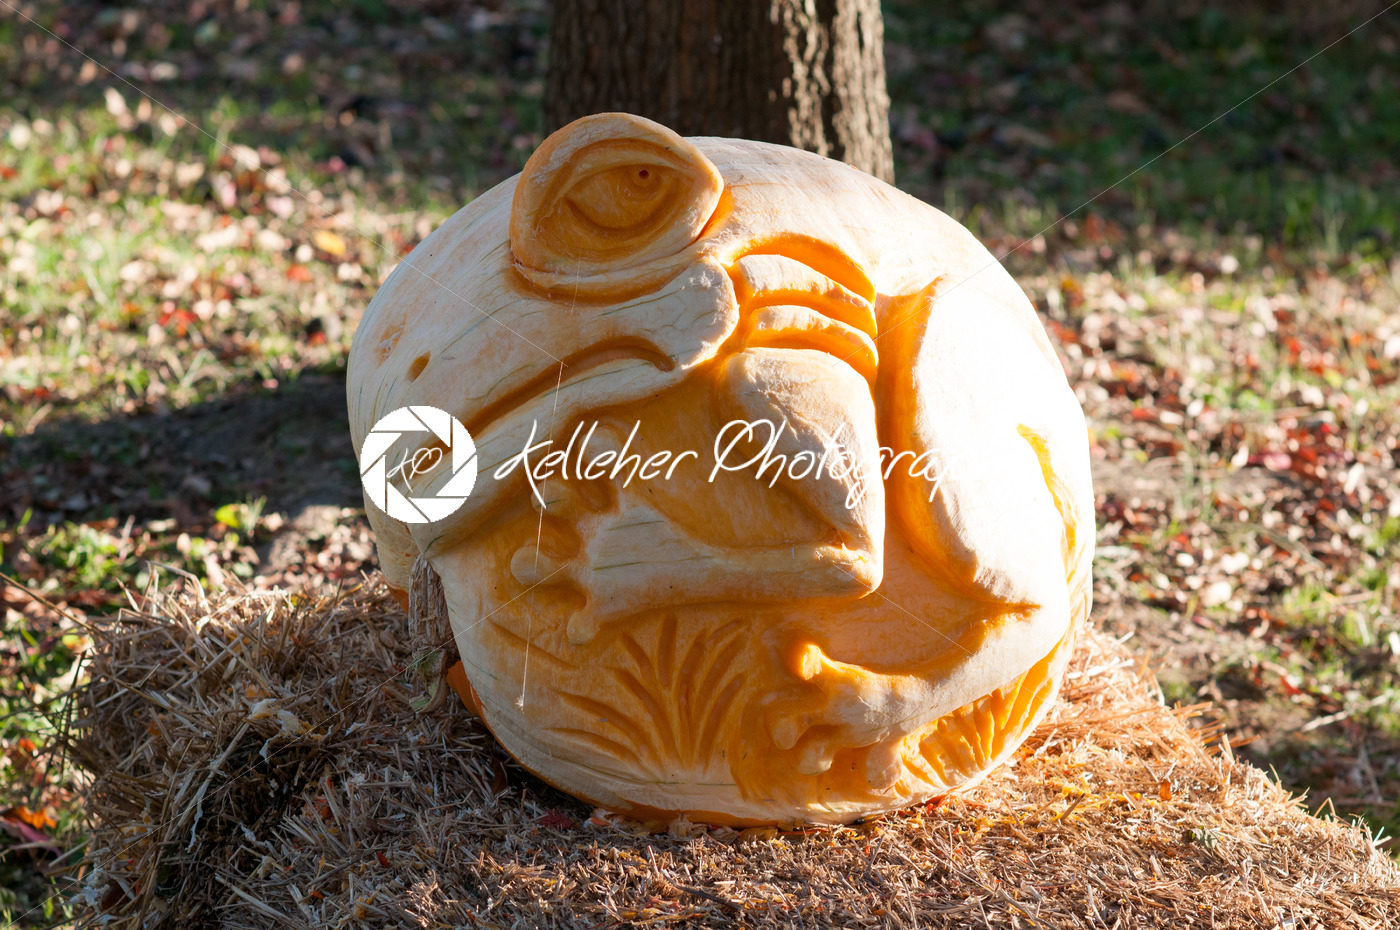 CHADDS FORD, PA – OCTOBER 26: Tree Frog Pumpkin at The Great Pumpkin Carve carving contest on October 26, 2013 - Kelleher Photography Store